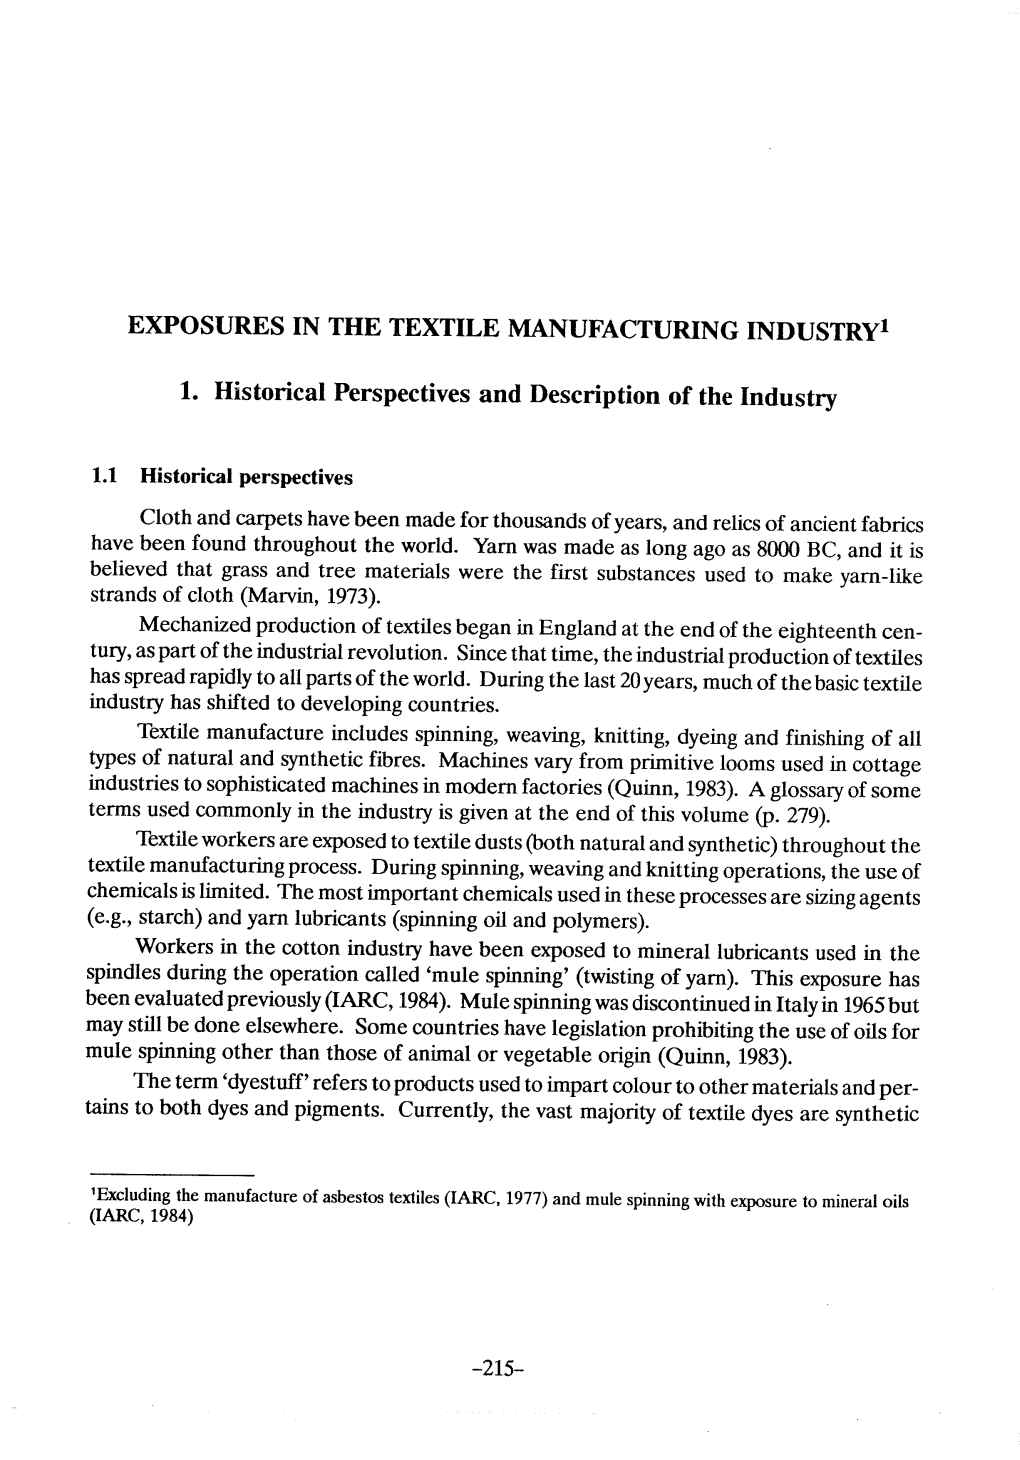 Exposures in the Textile Manufacturing Industry